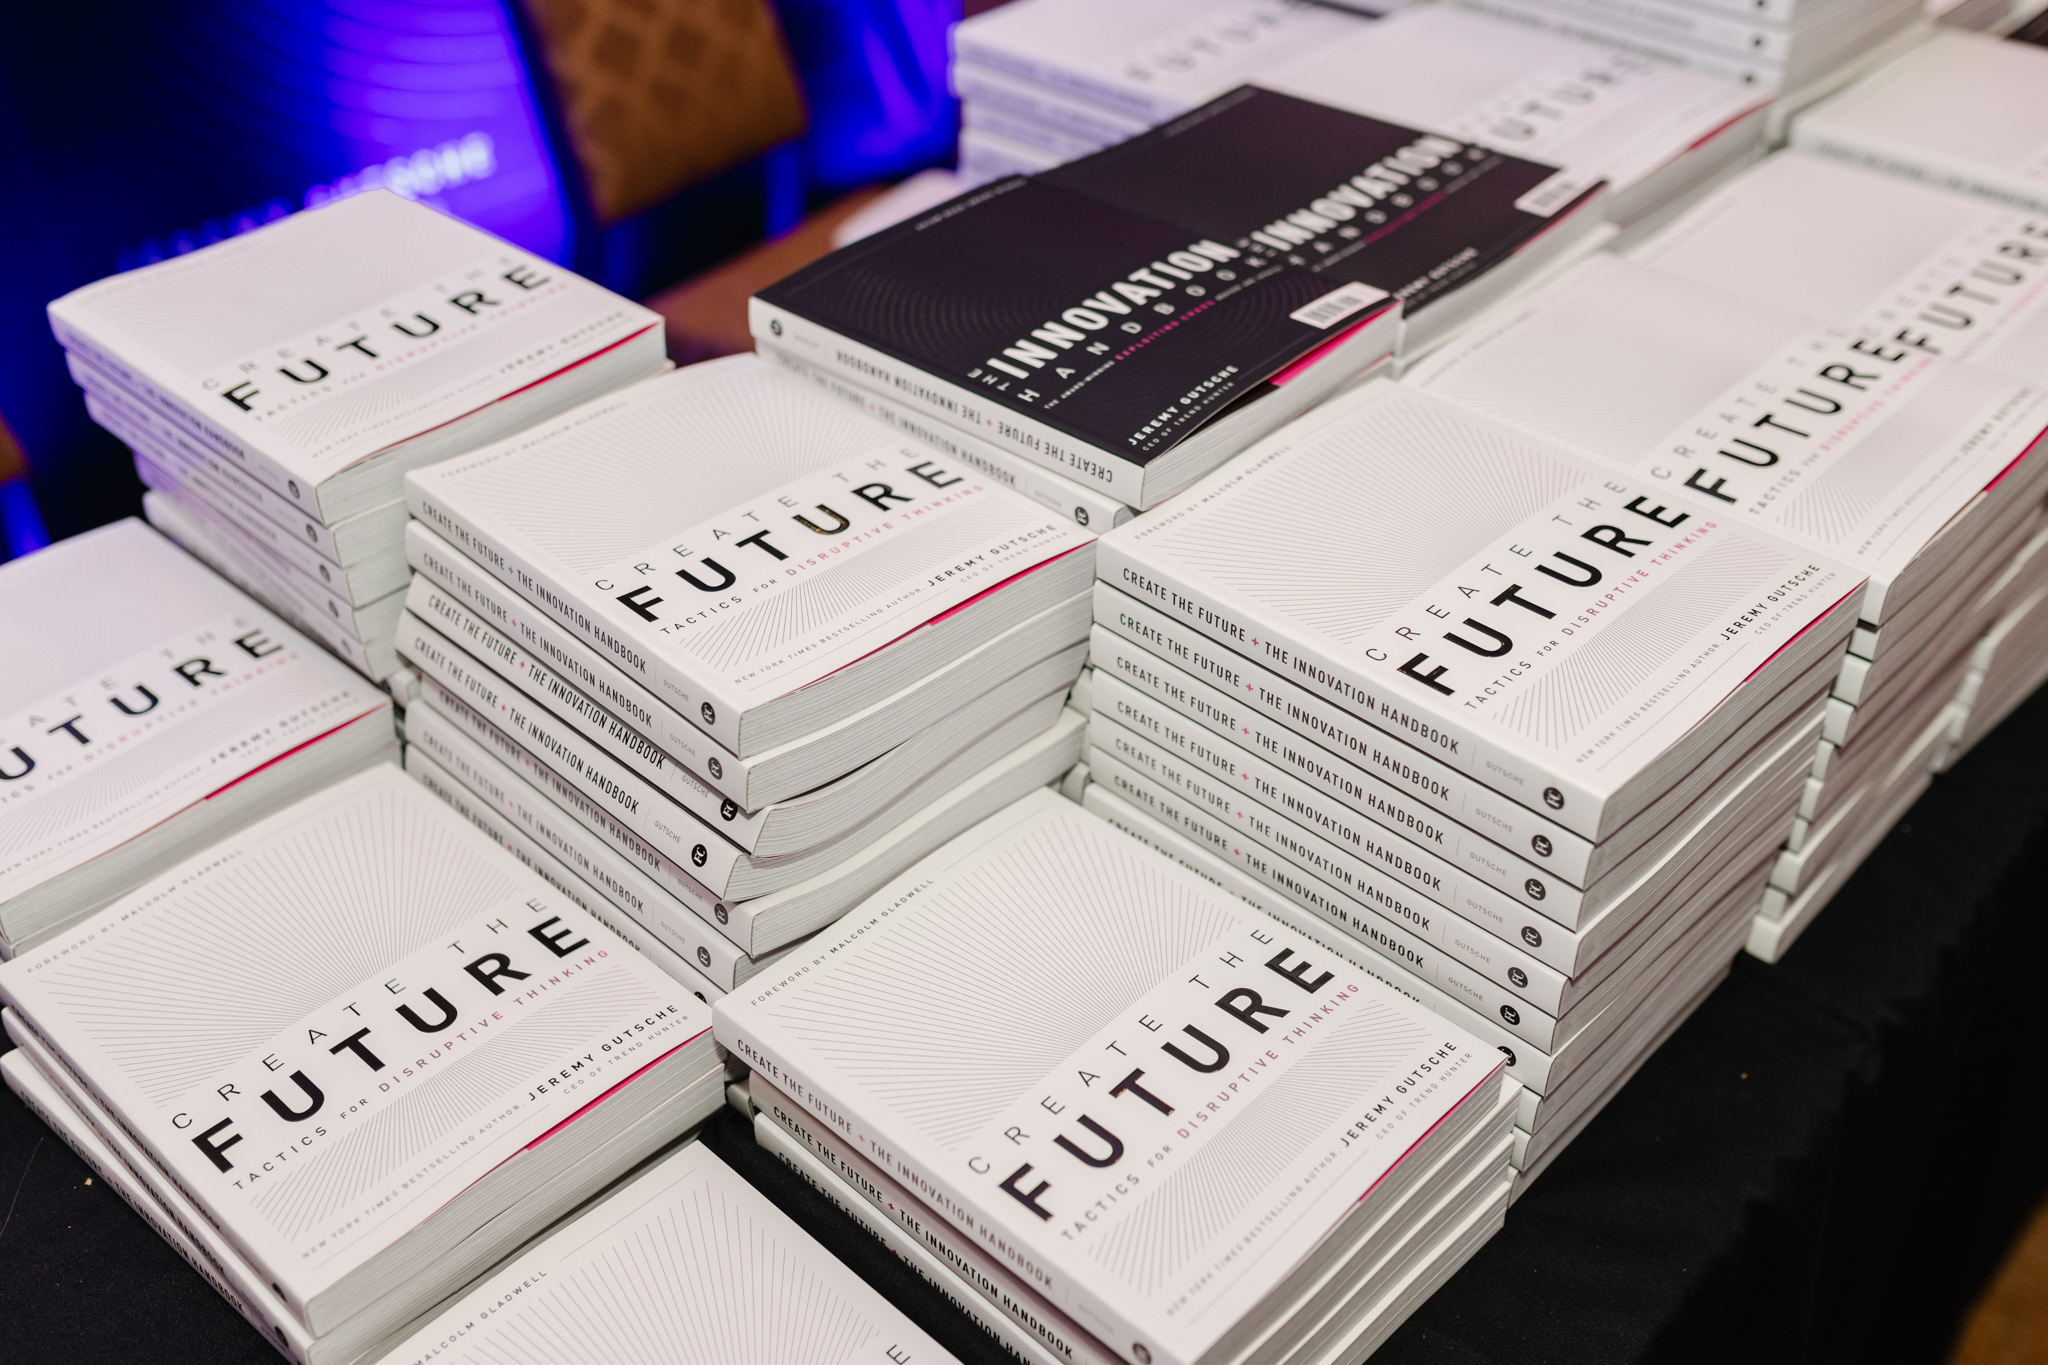 A stack of books on a table captured at an event.